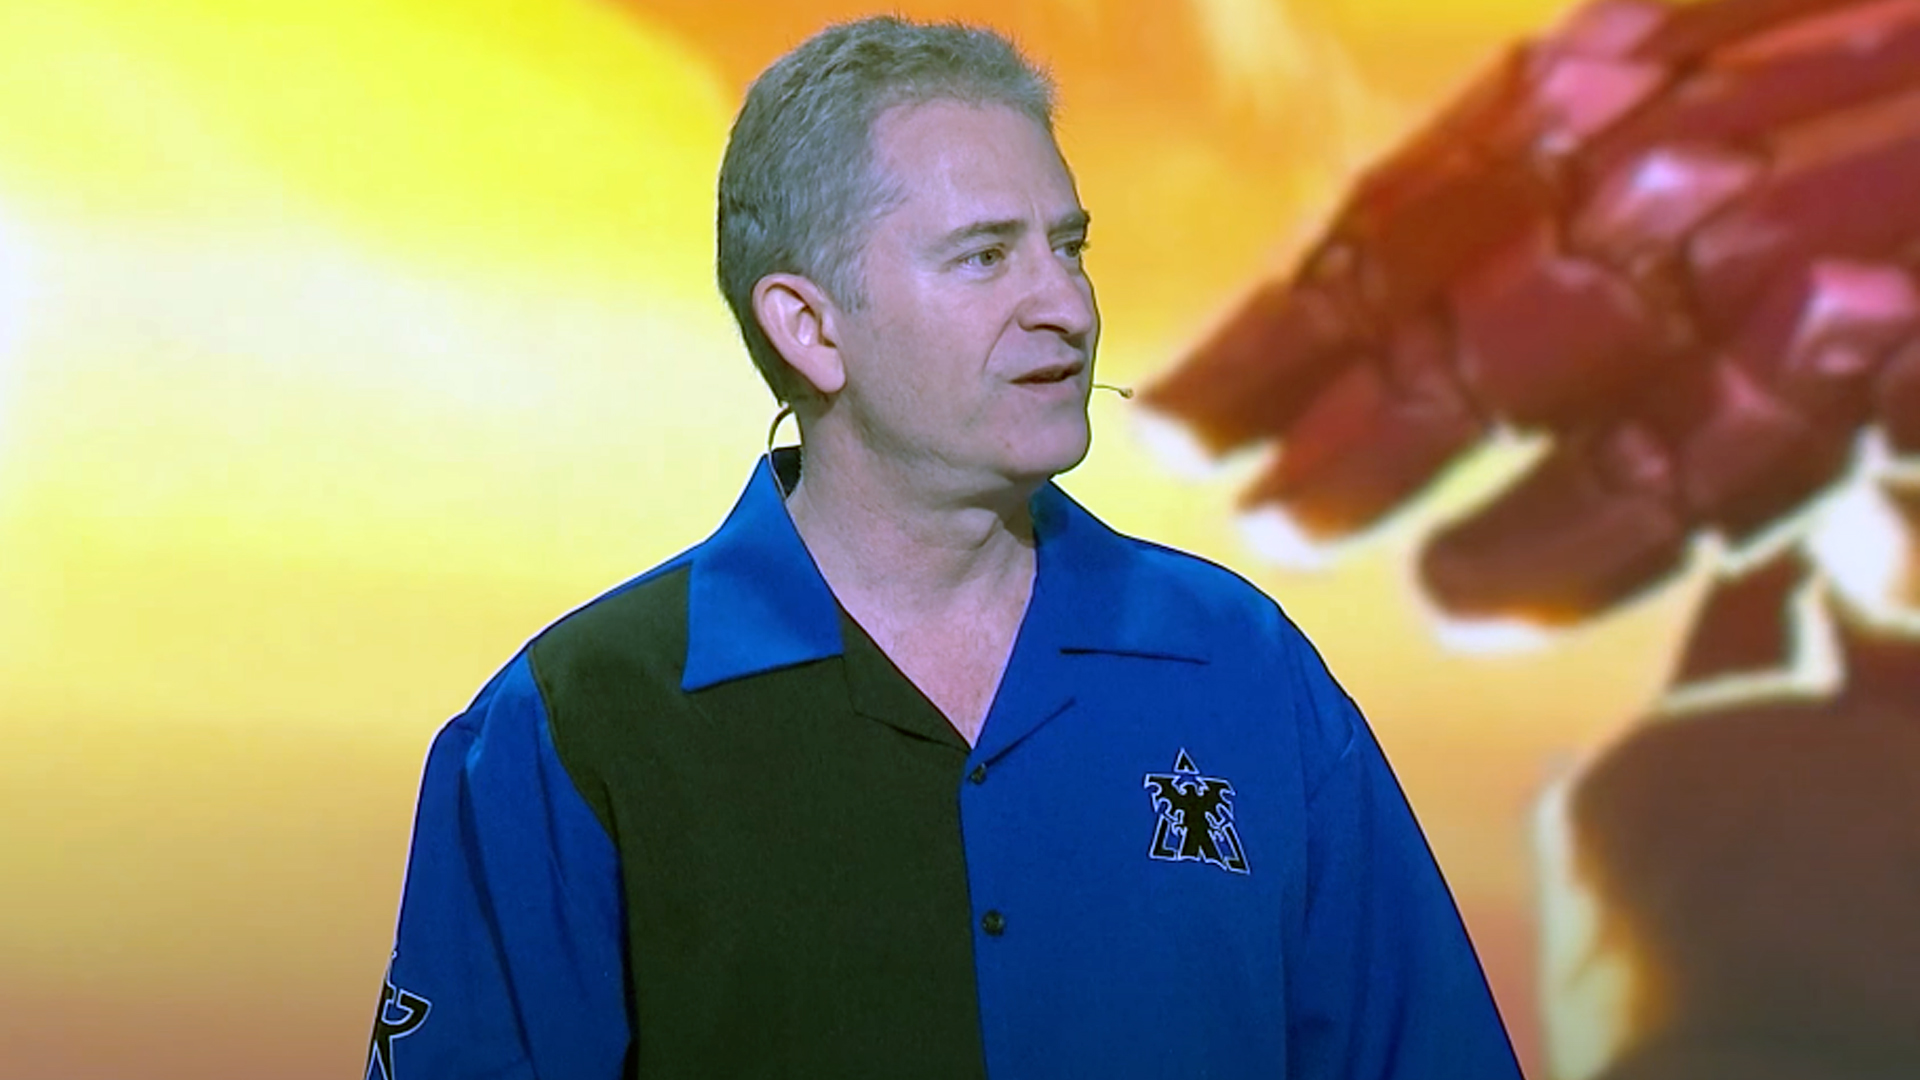 Ex-CEO Mike Morhaime to the women of Blizzard: “I am so sorry to have let you down”